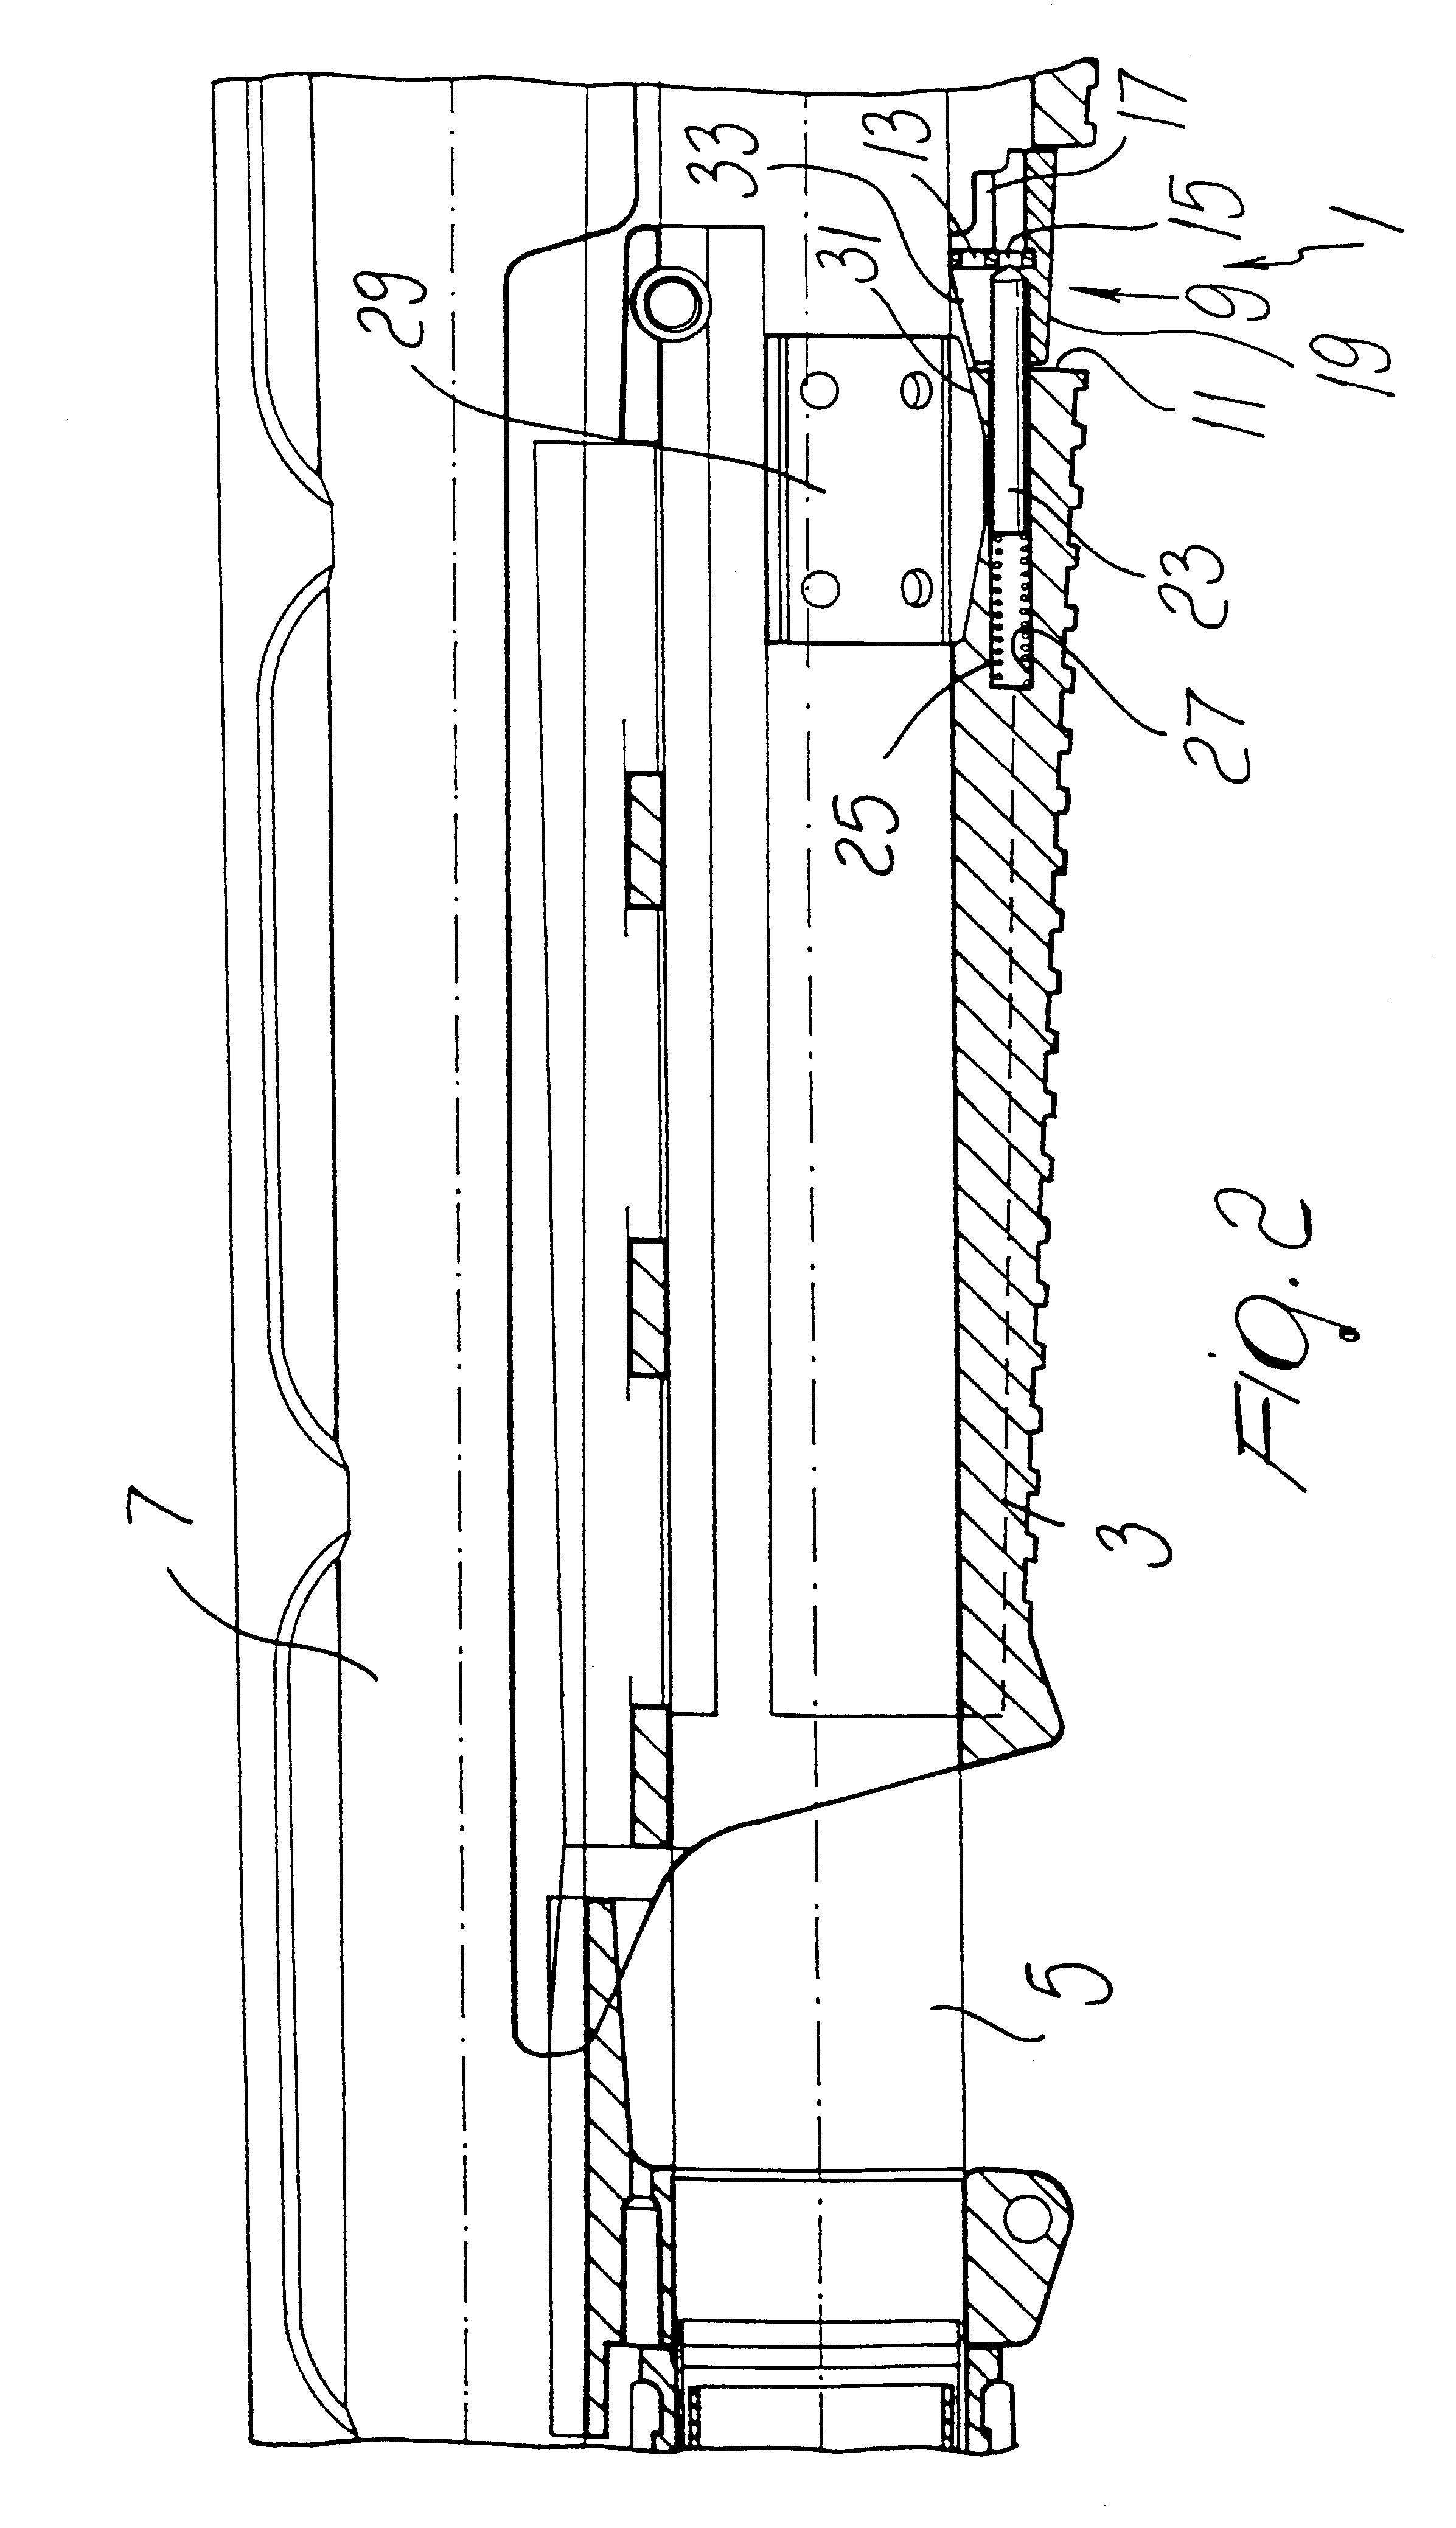 Device for controlling the feeder system of pump-action shotguns